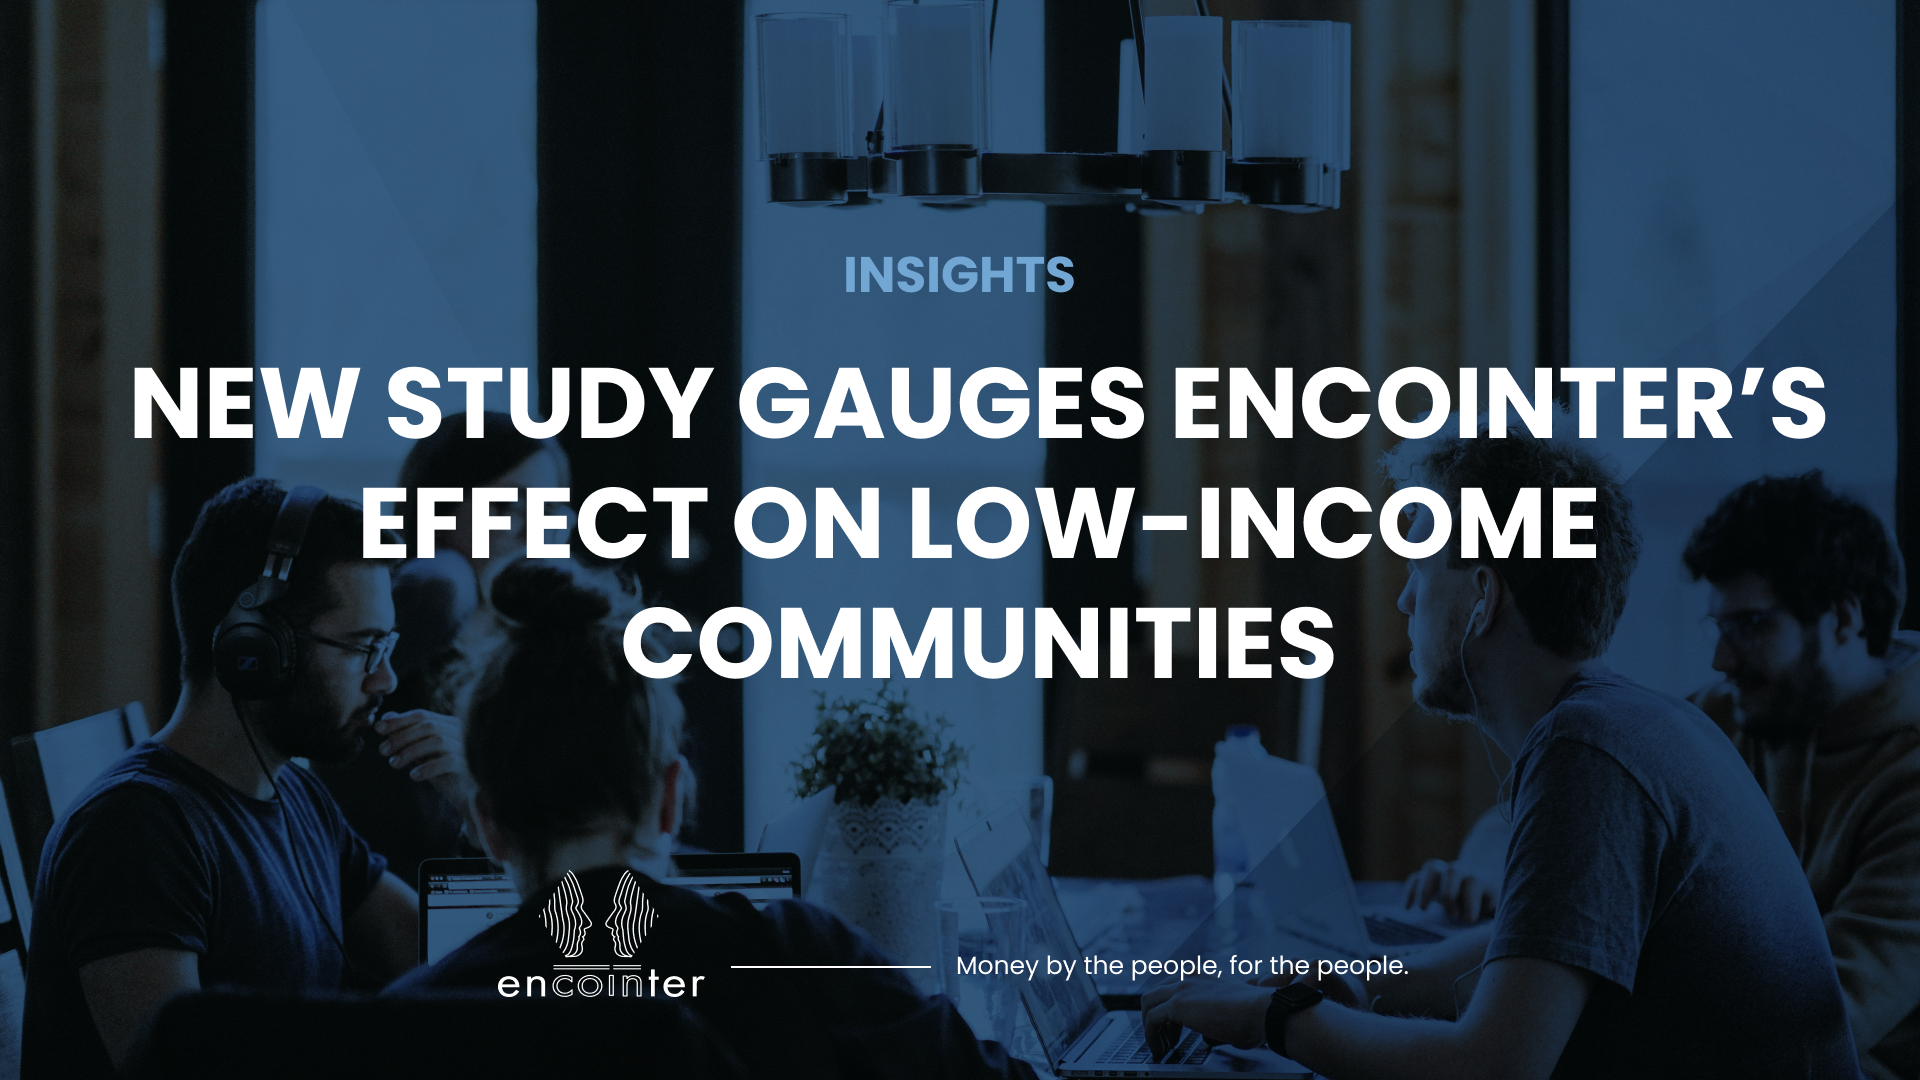 Encointer Blog_ New Study Gauges Encointers Effect on Low-Income Communities